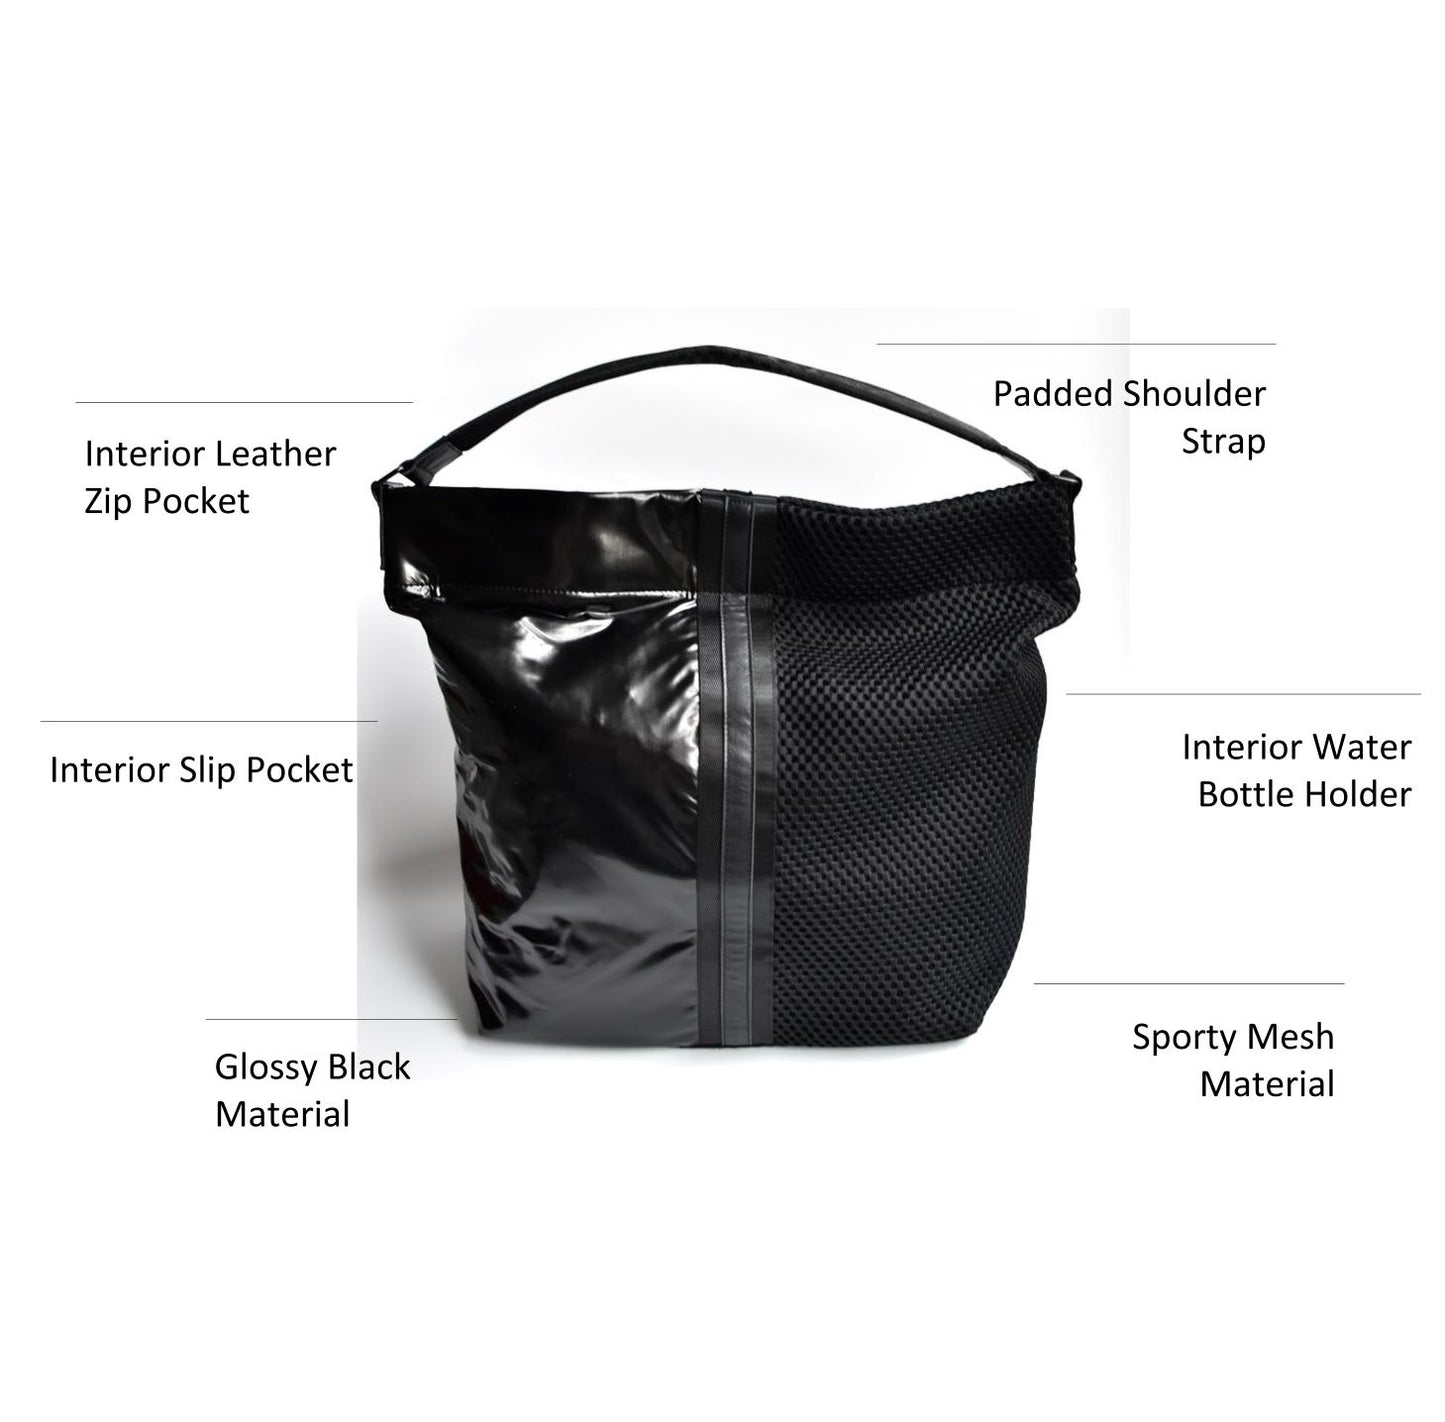 Black mesh and glossy vinyl sporty tote bag with black leather and webbing details.